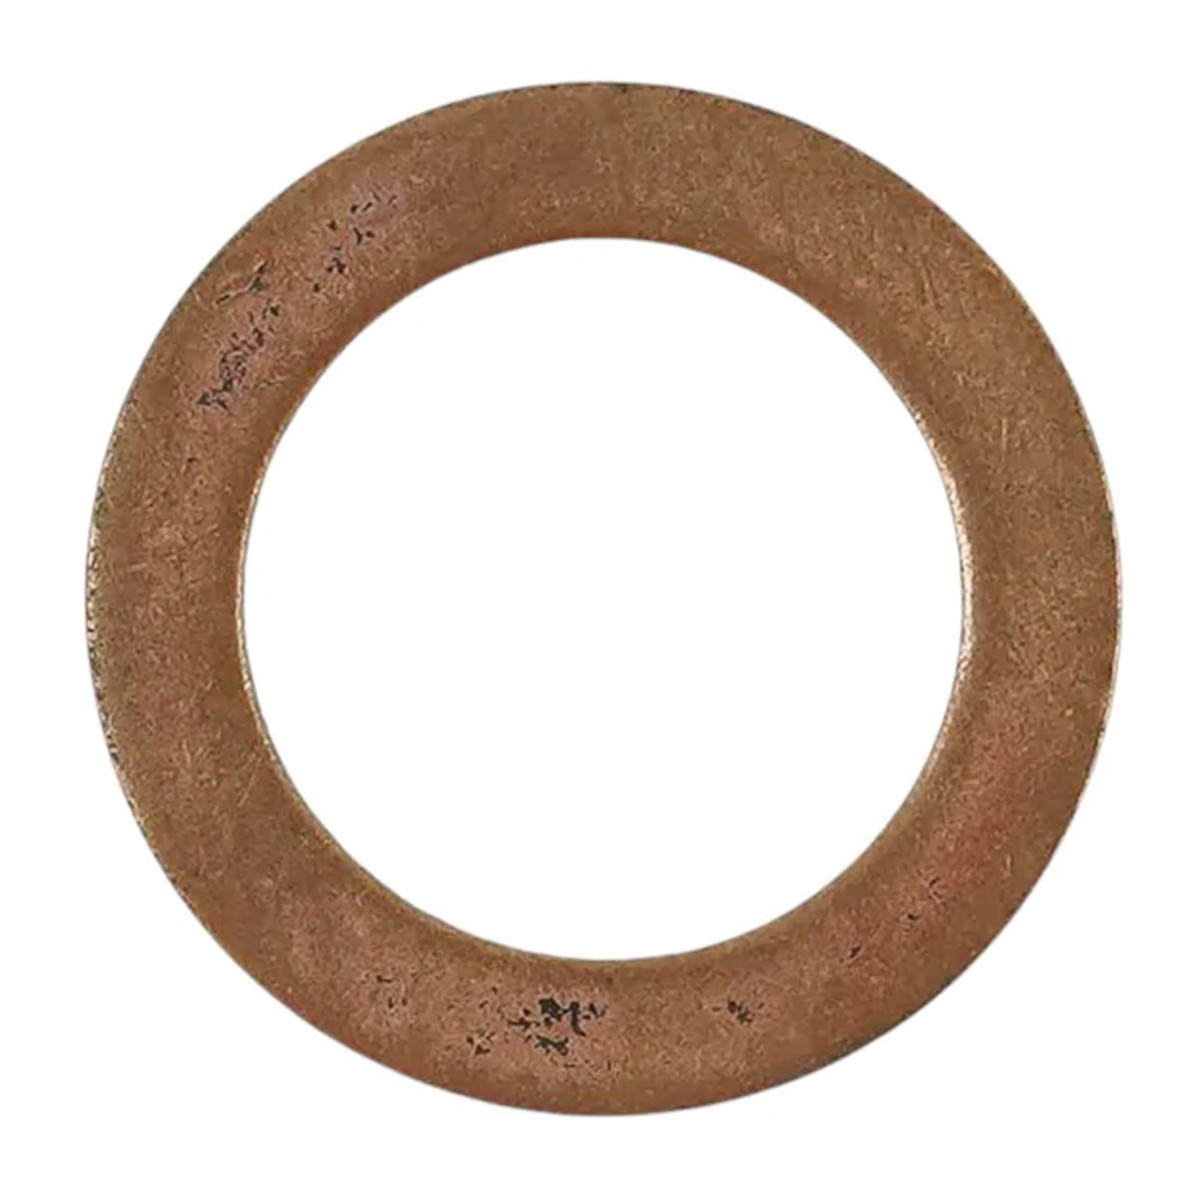 Copper washer 22 x 1.00 mm / LS Tractor / Q0650004 / 40012782